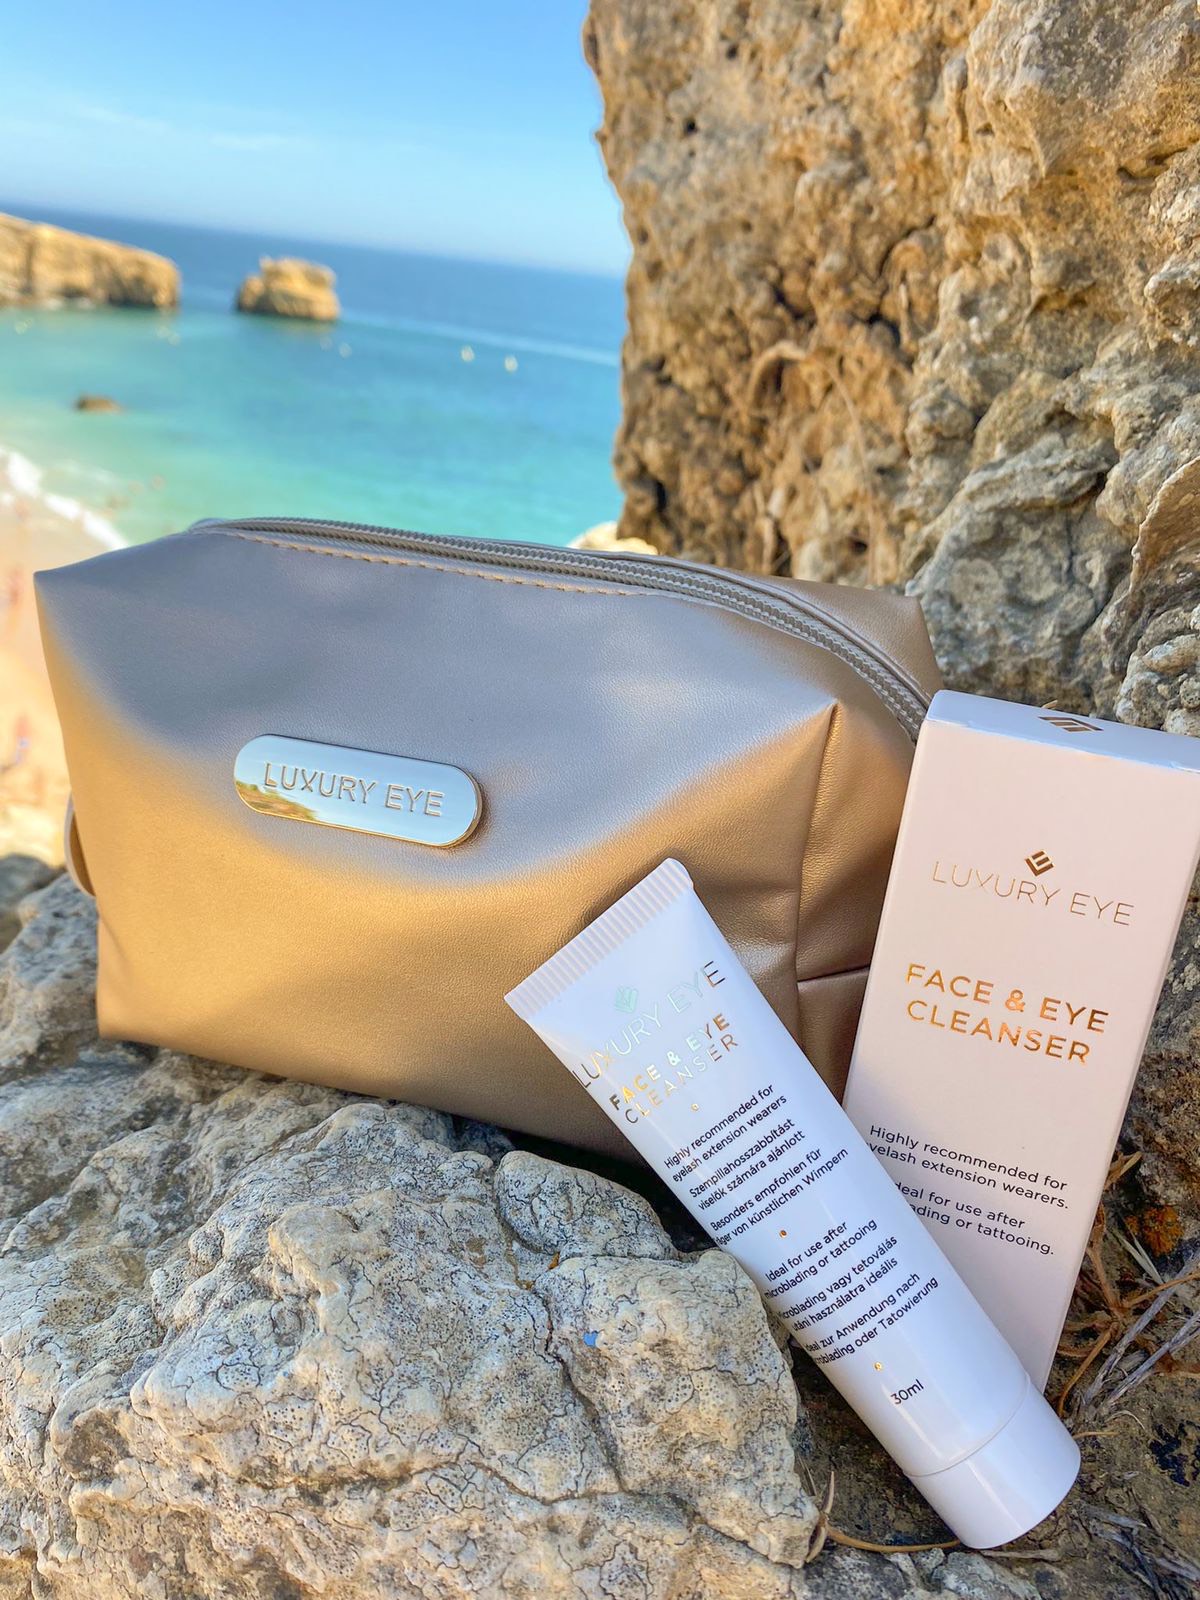 Luxury Eye toiletry bag and face and eye cleanser